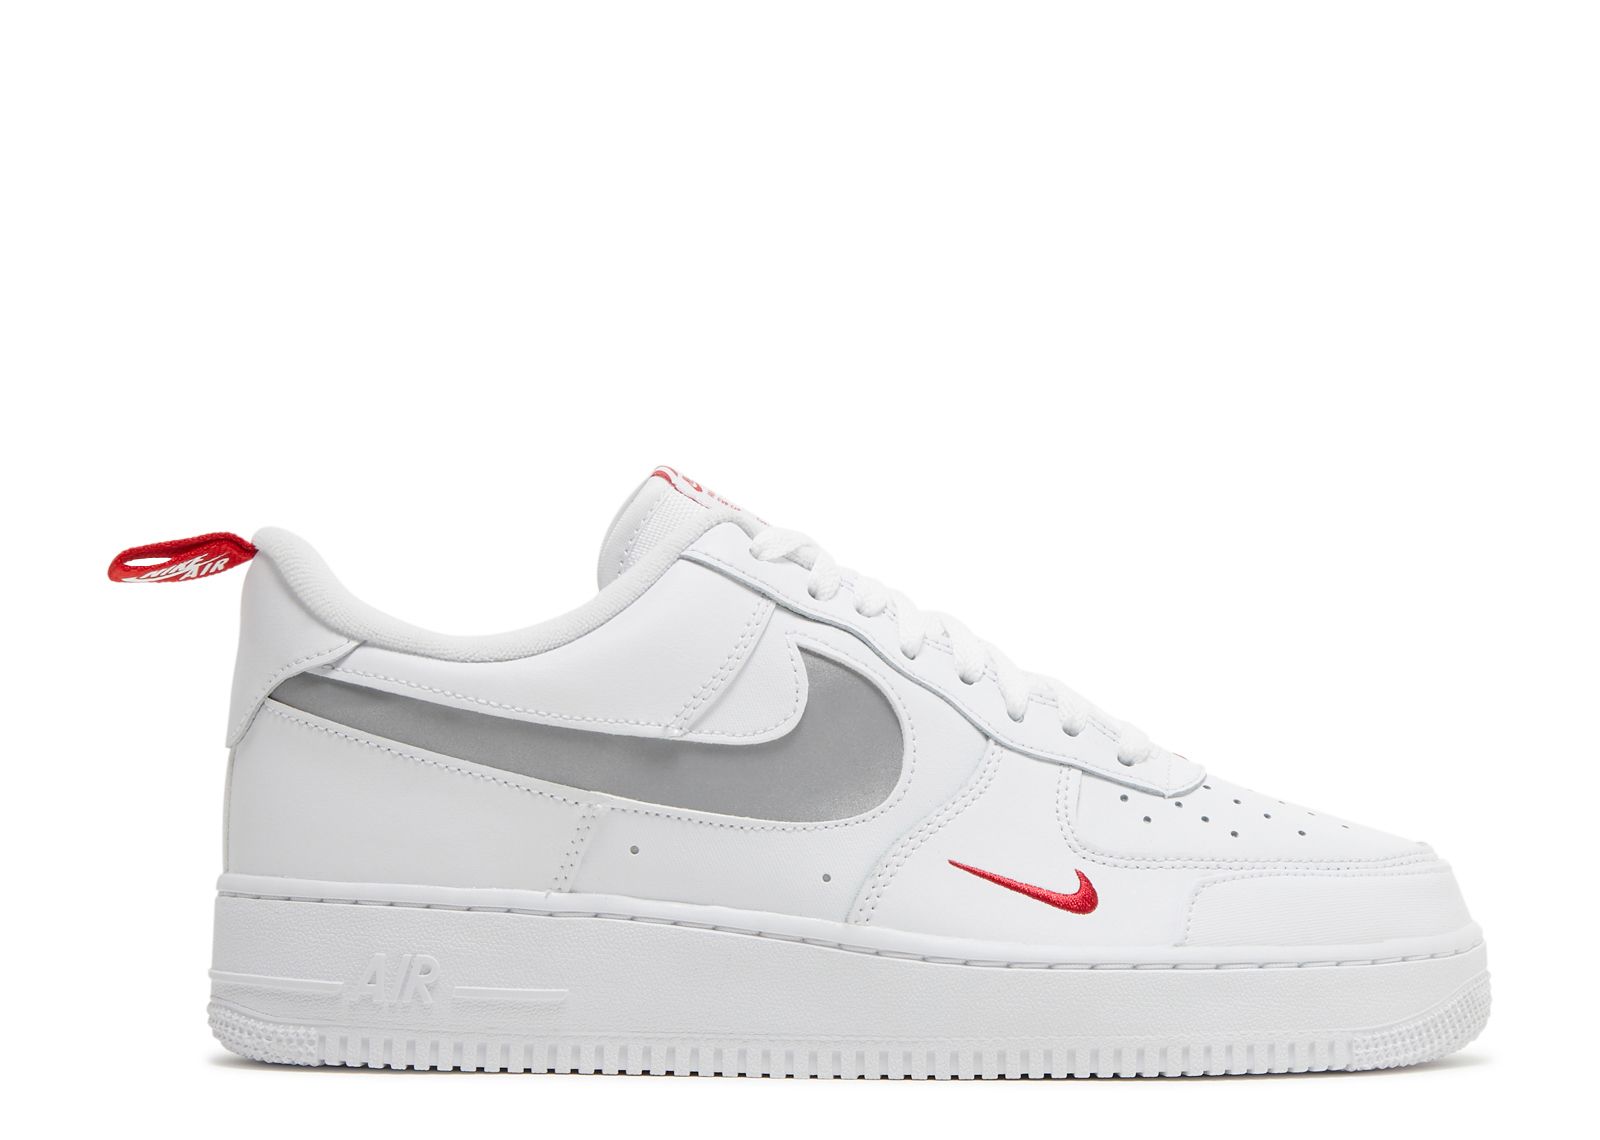 Air Force 1 Low 'Cut Out Swoosh White' - Nike - DO6709 100 -  white/university red | Flight Club